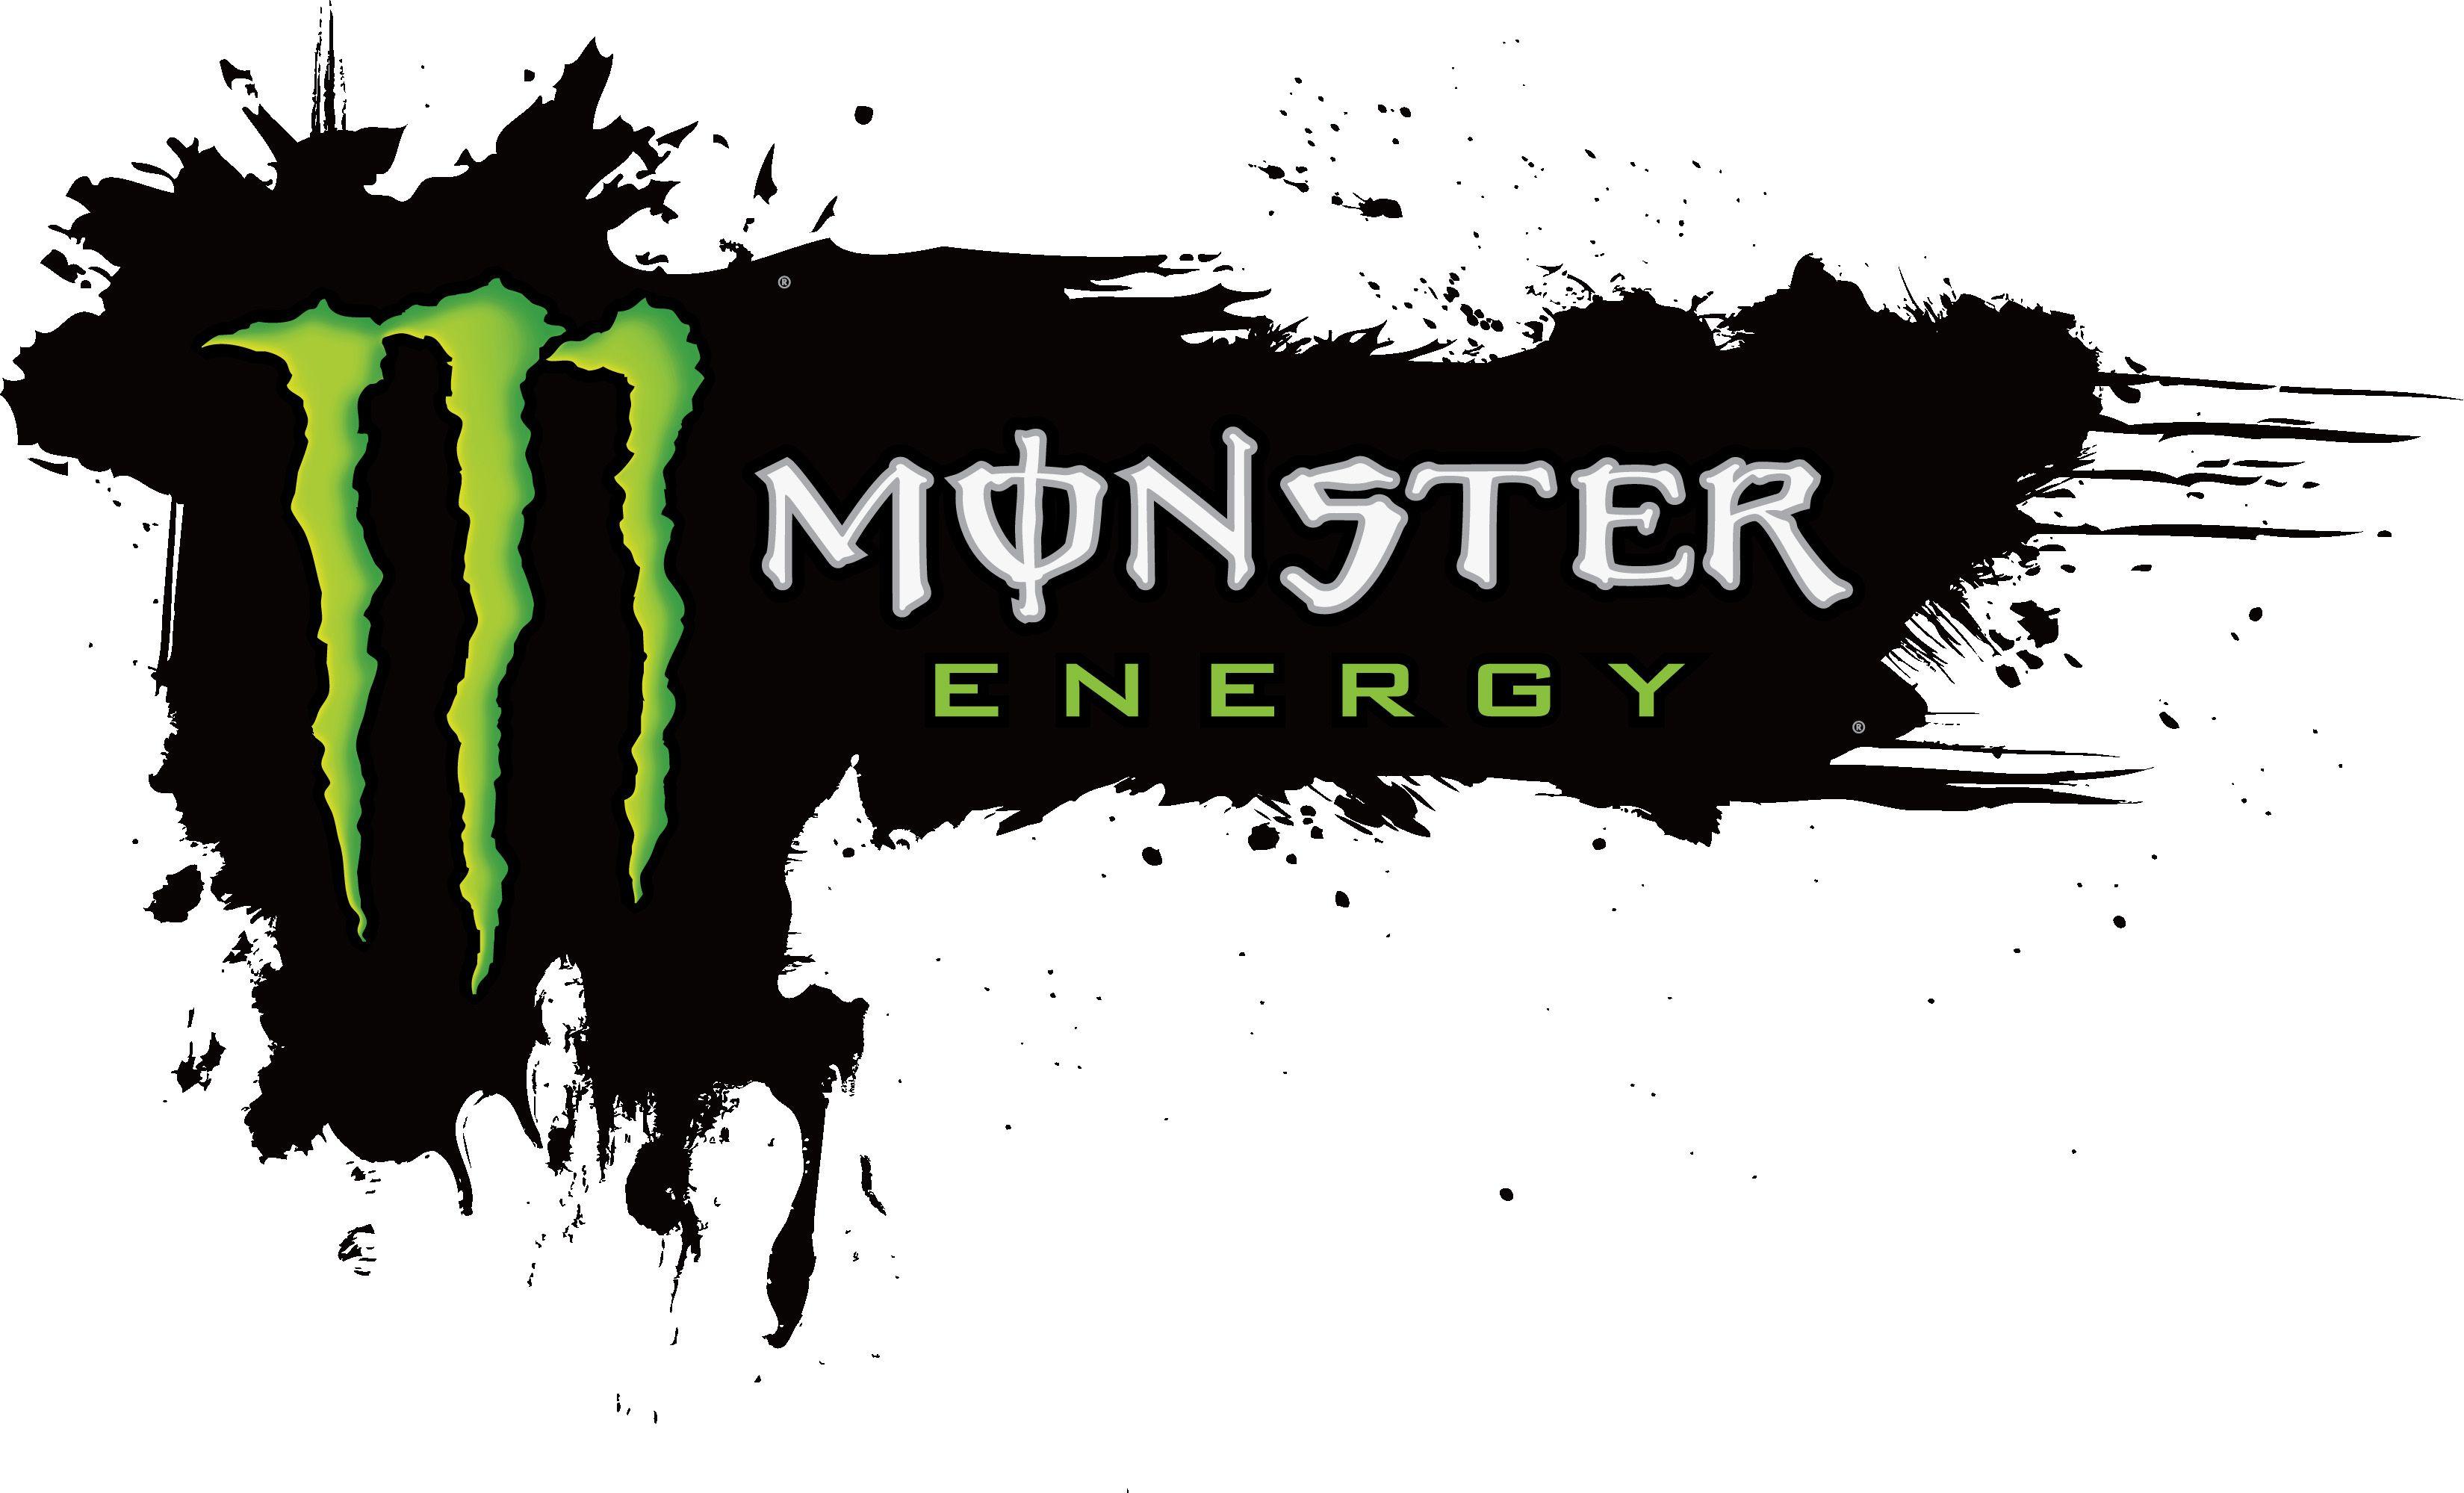 Monster Energy Logo - Monster Energy Logo, Monster Energy Symbol, Meaning, History and ...